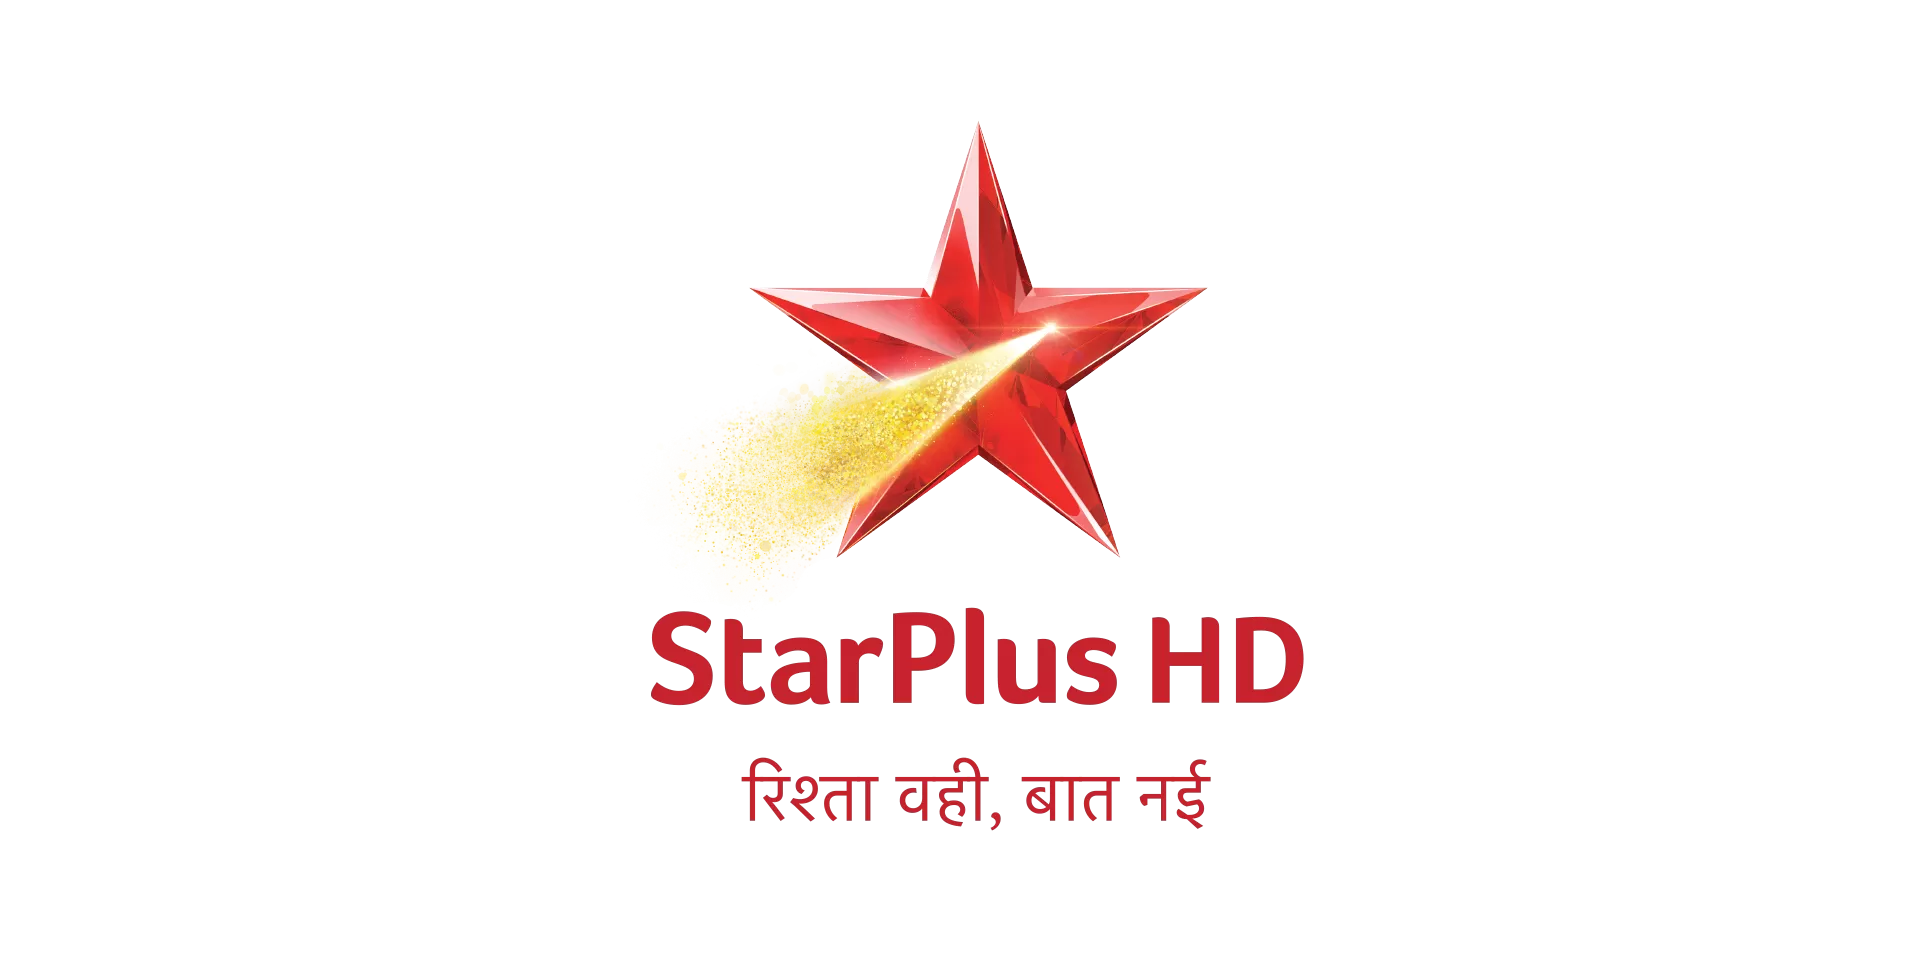 Television Media Star Plus HD Advertising in India